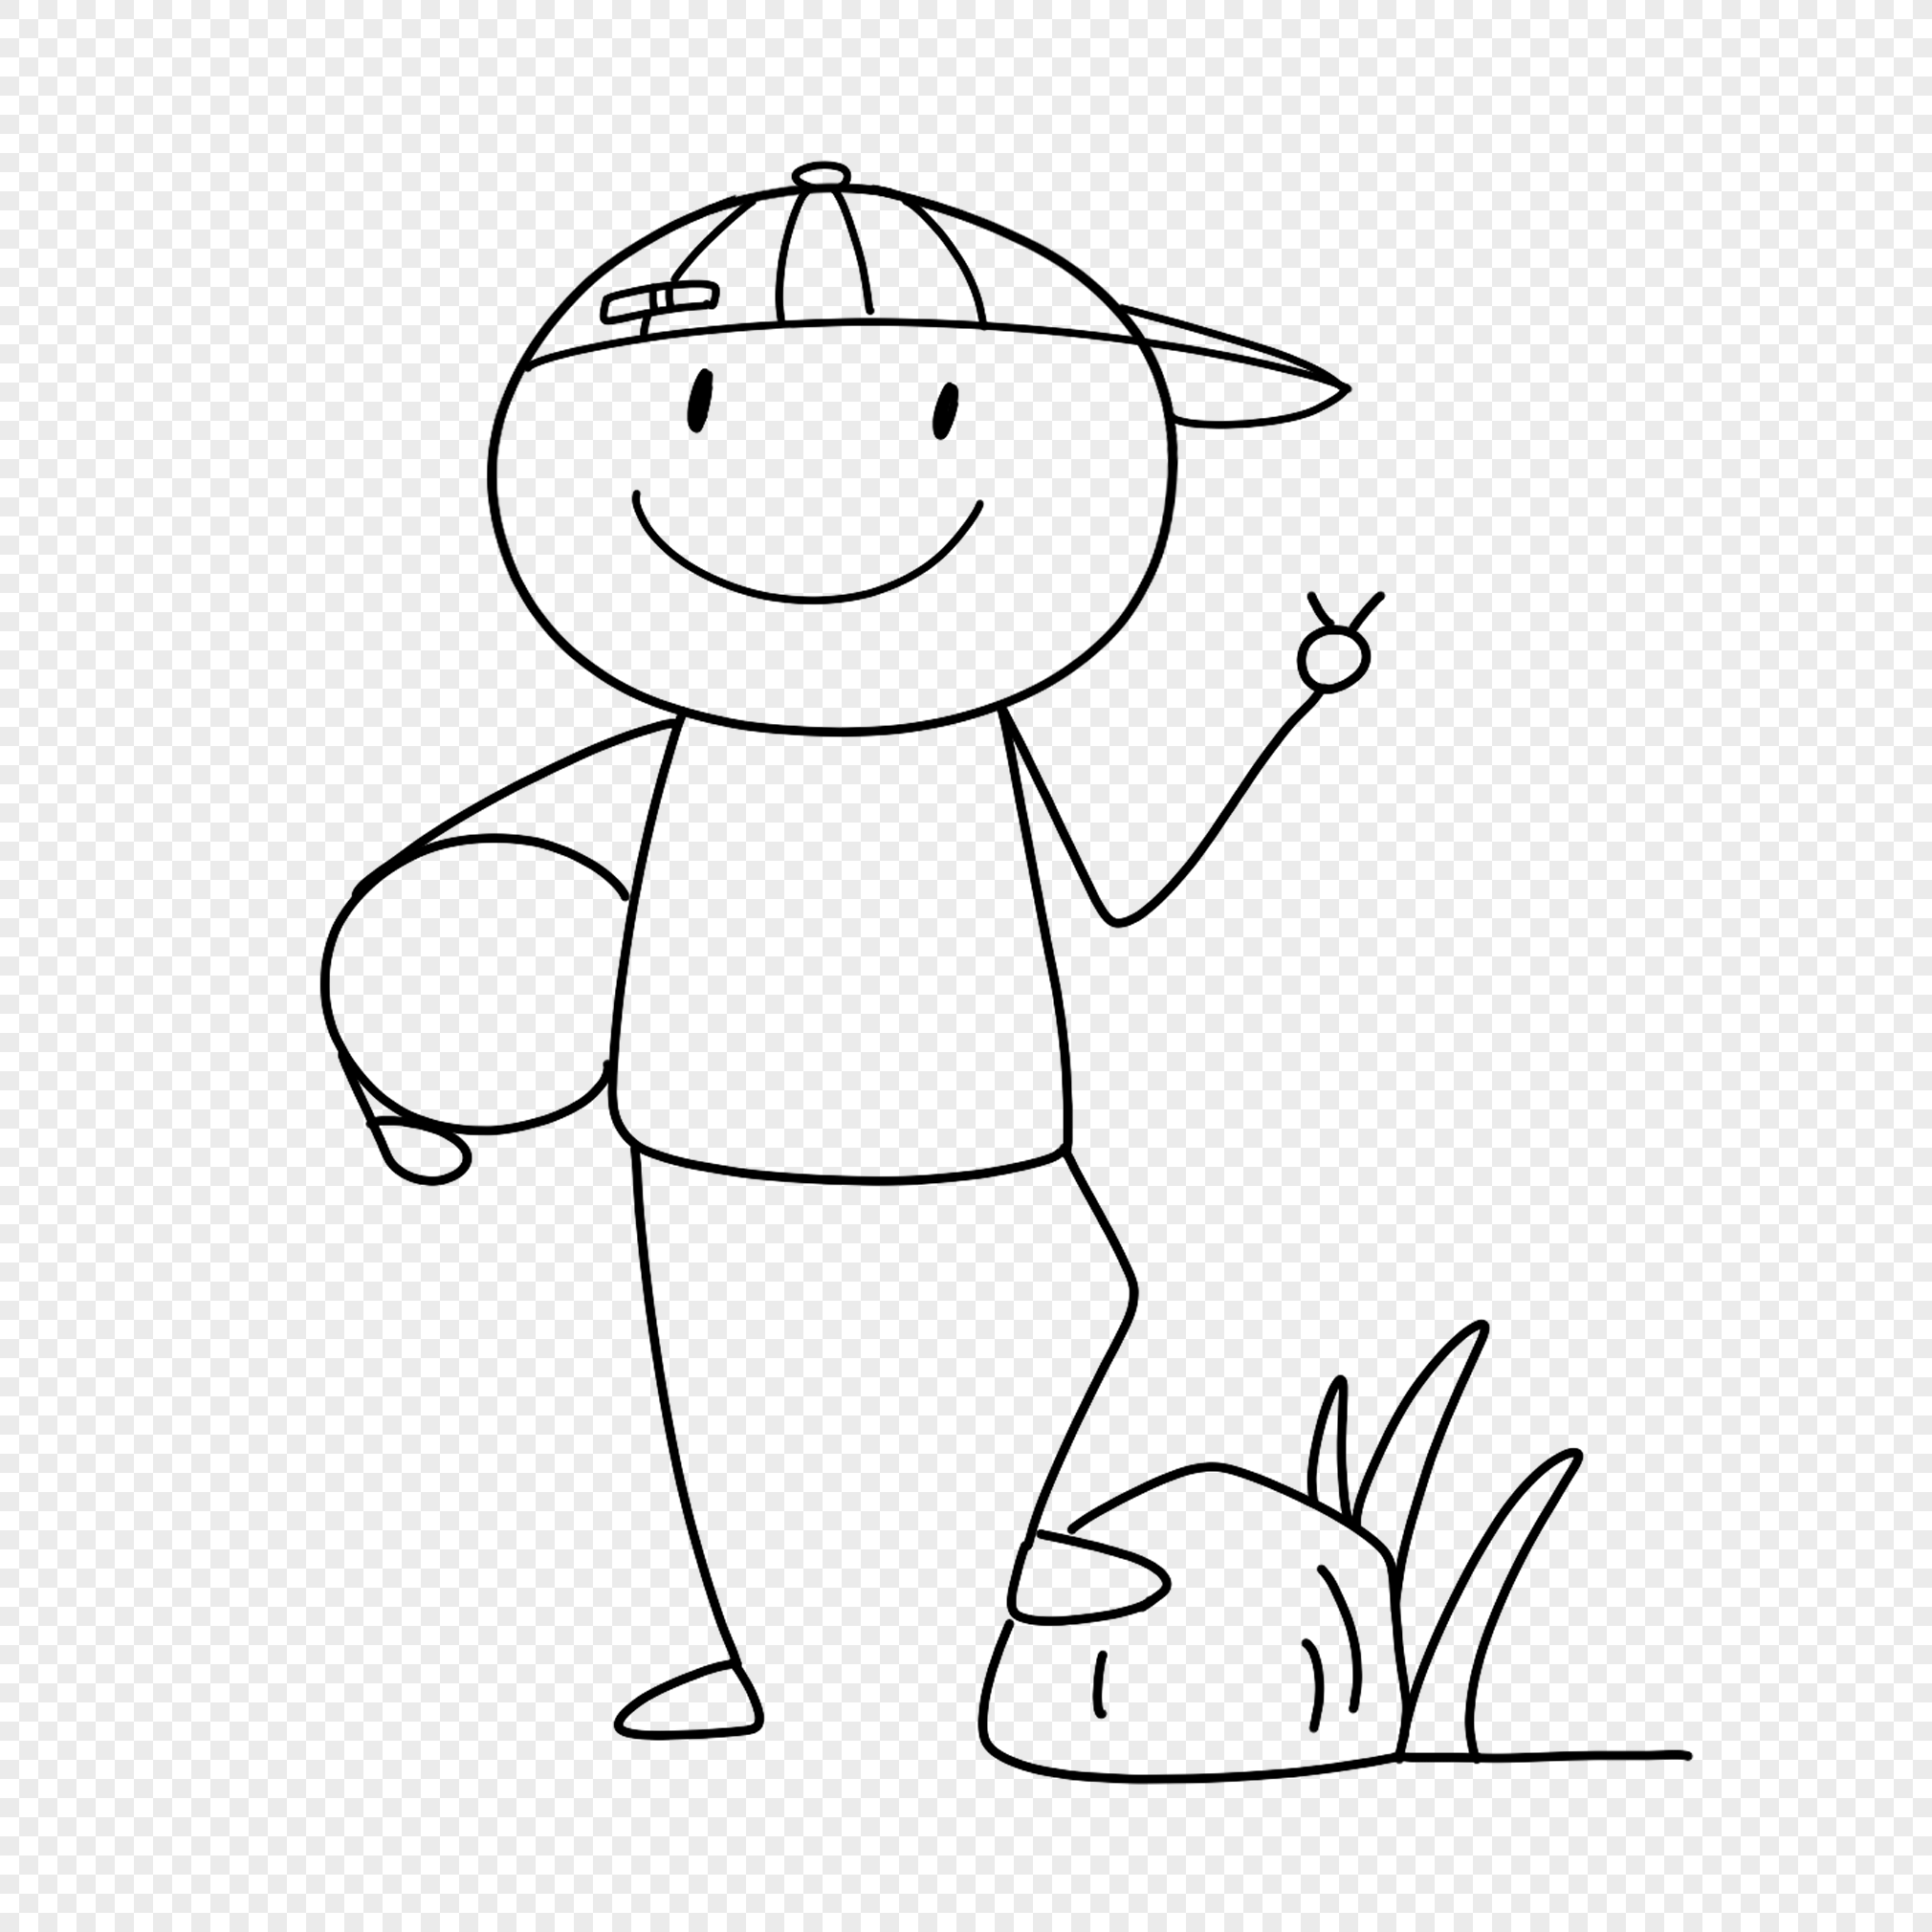 Kid Stick Figure PNG Images With Transparent Background